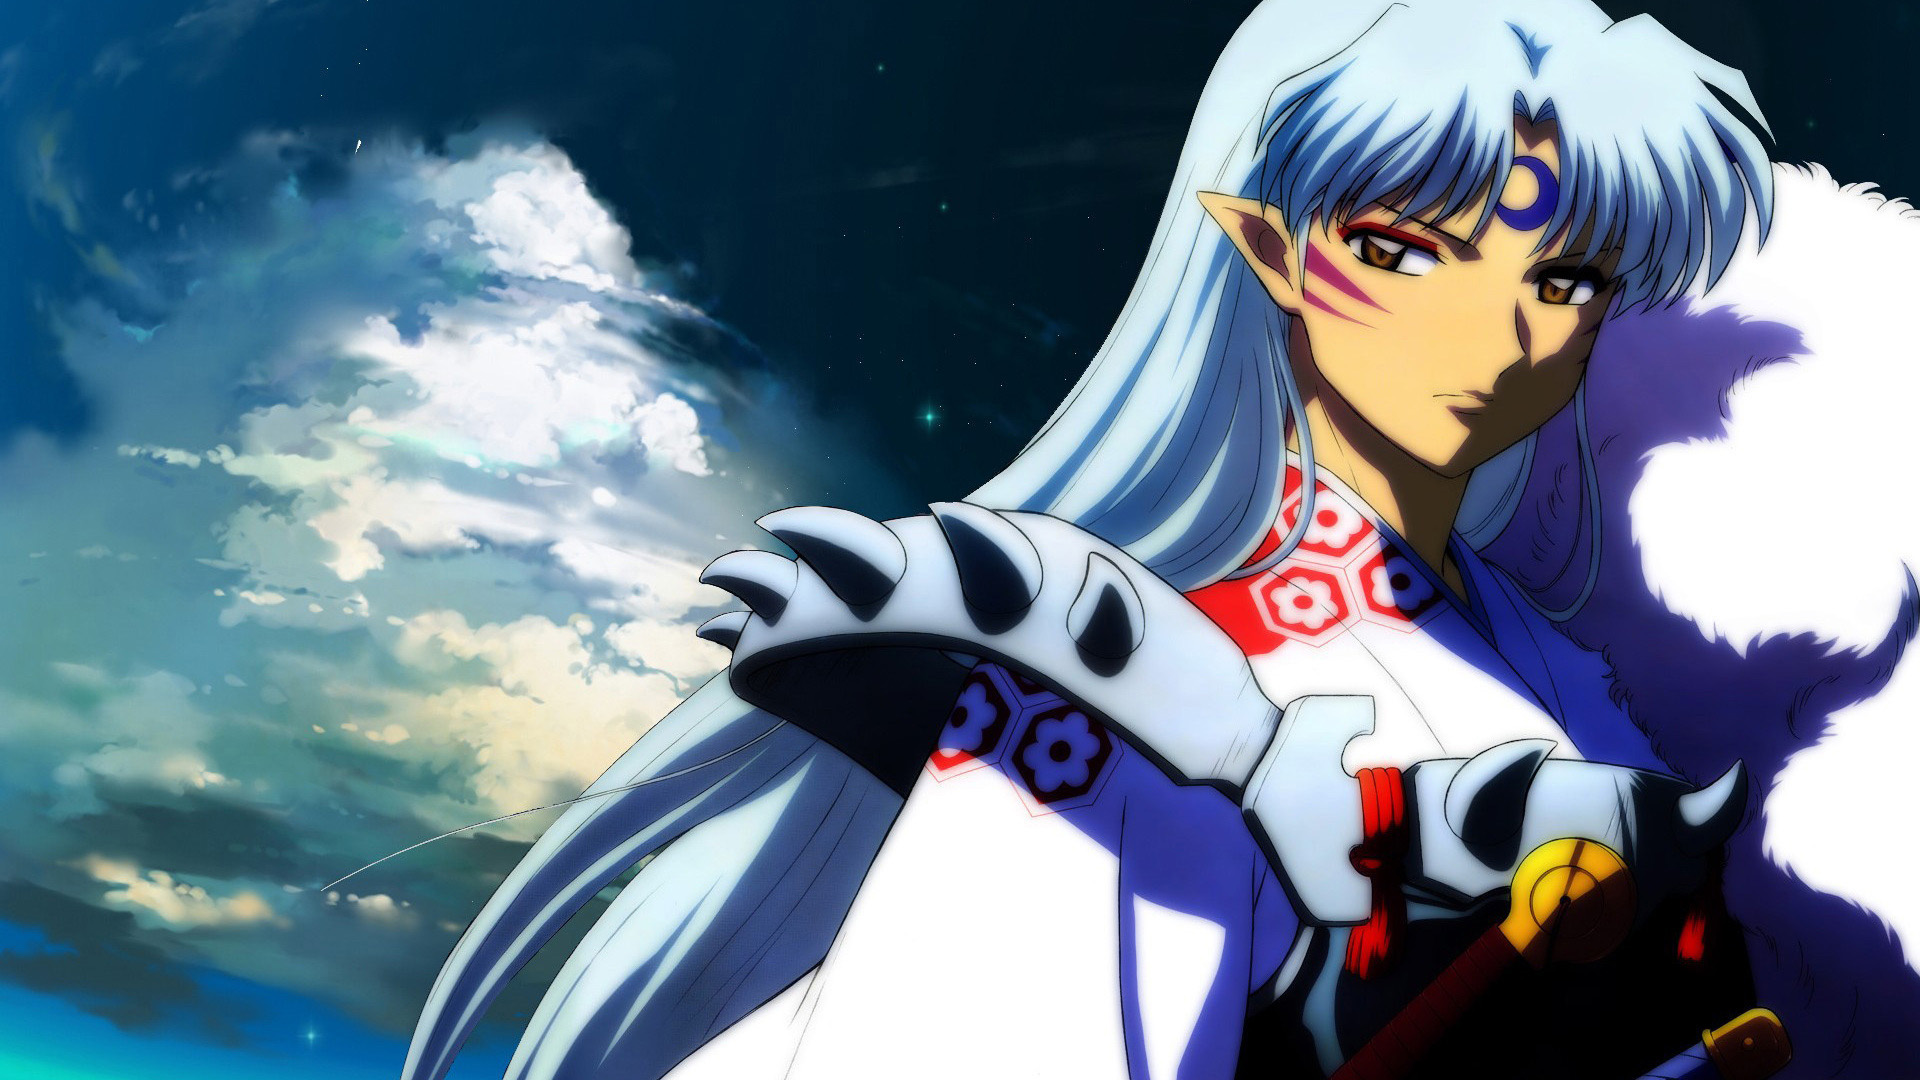 Inuyasha HD Background Picture Image